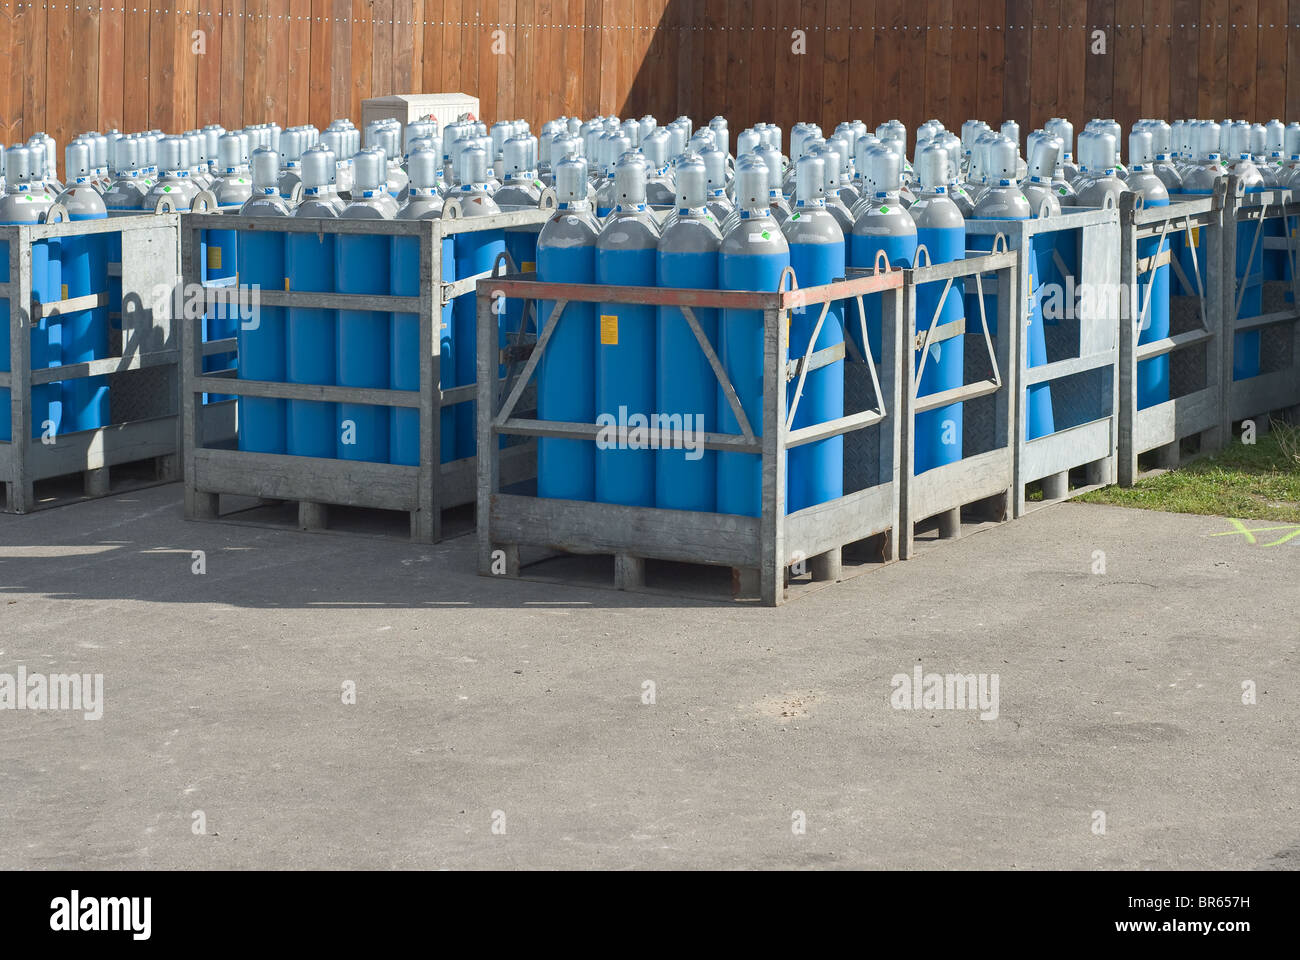 Industrial Size Gas Bottles for Cooking and Heating Stock Photo